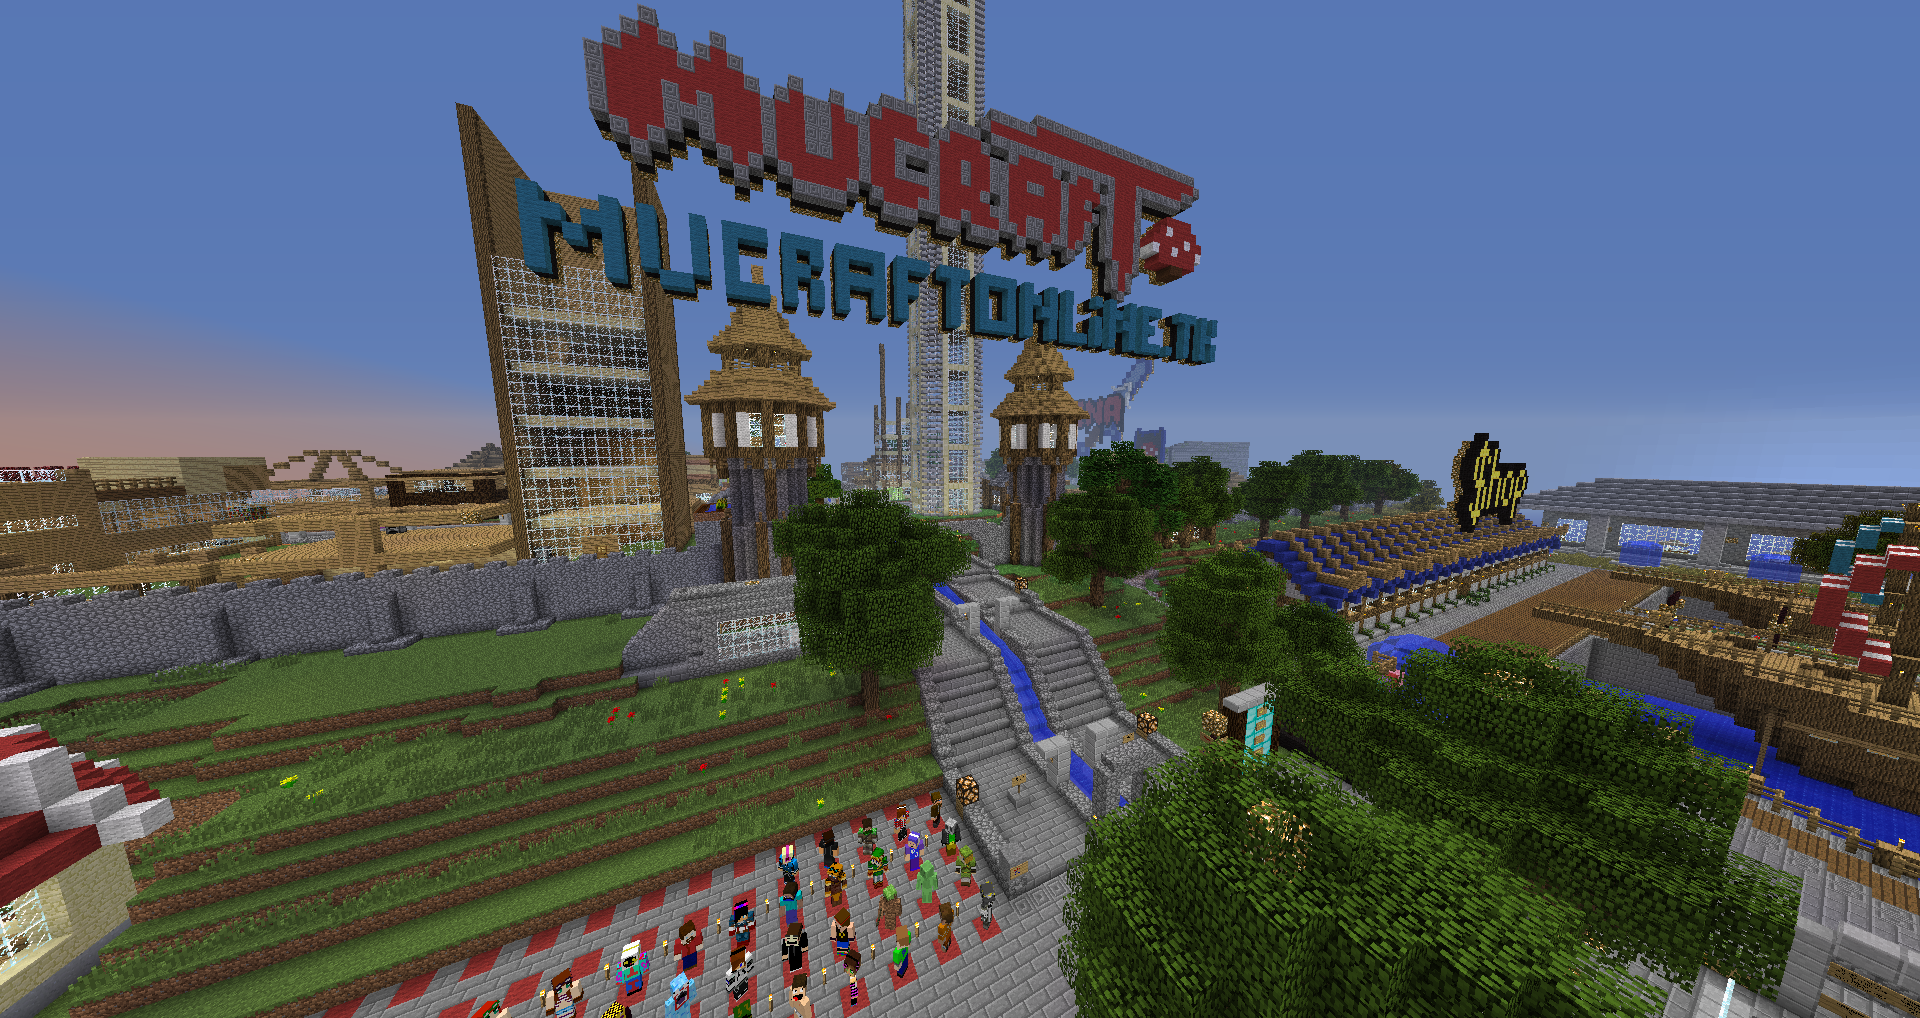 Picture from the minecraft server MuCraft 2012